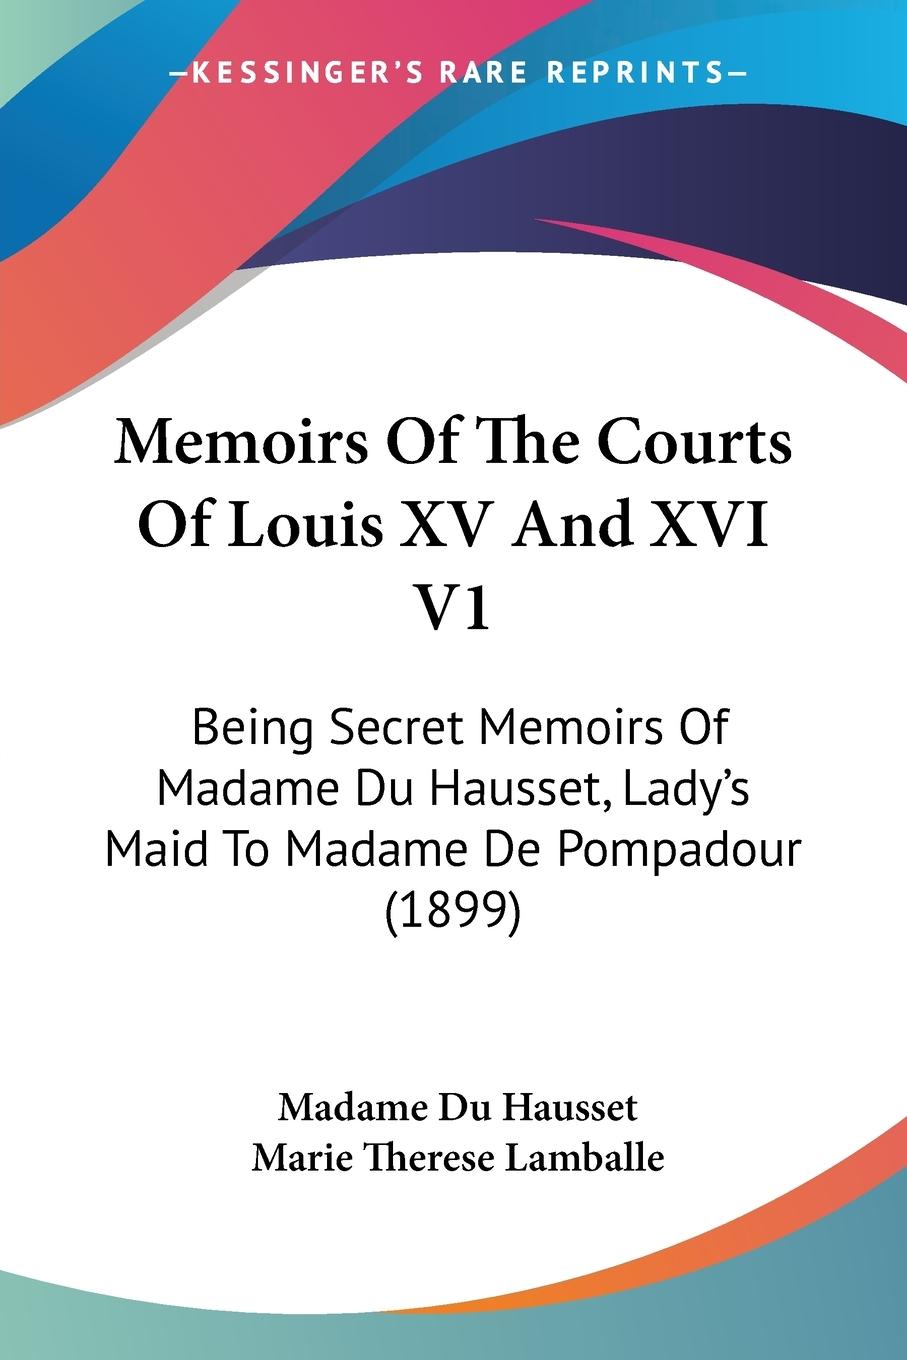 Memoirs Of The Courts Of Louis XV And XVI V1 - Du Hausset, Madame Lamballe, Marie Therese